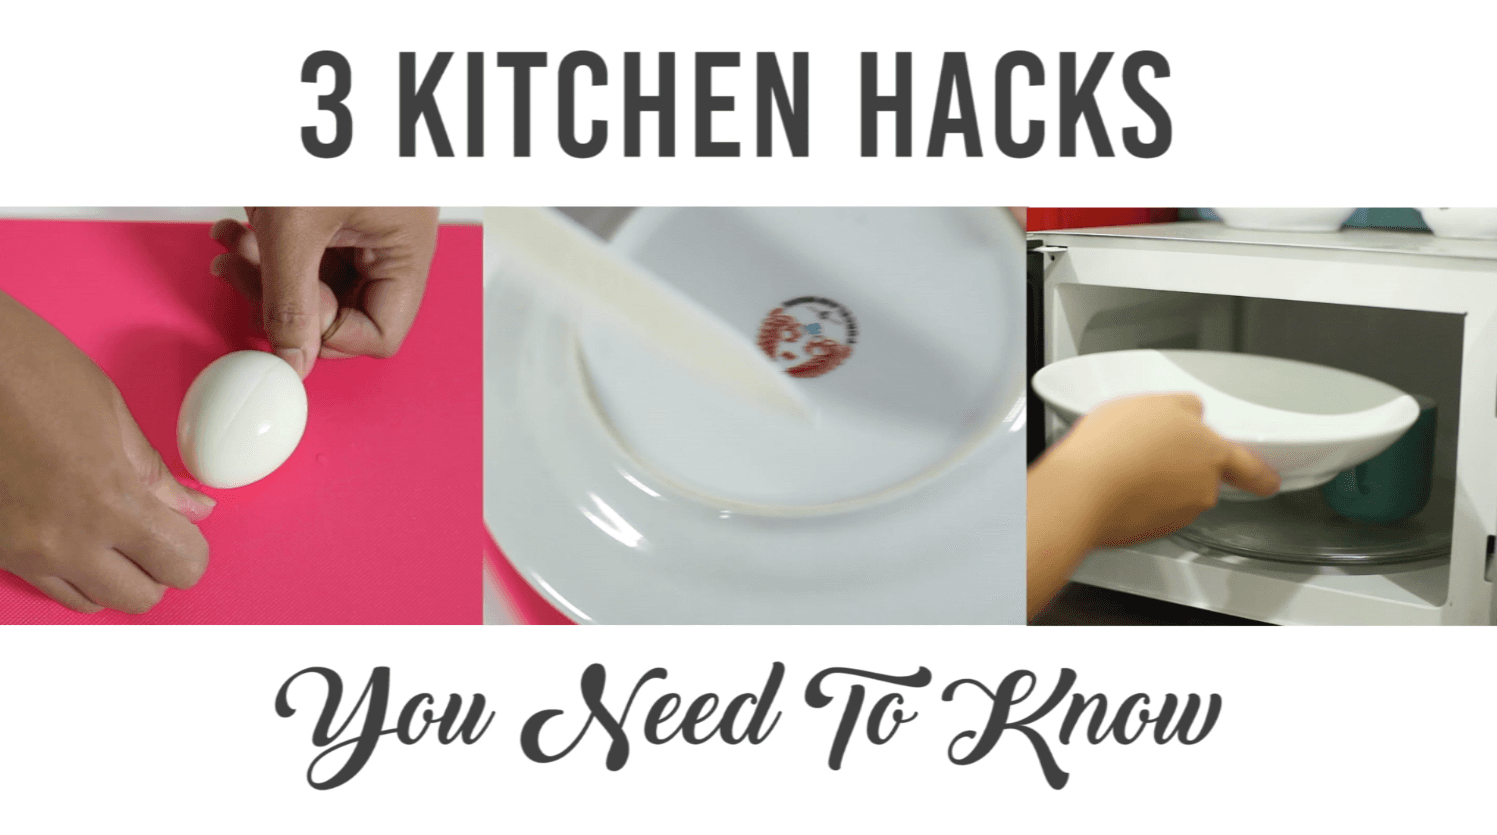 3 Kitchen Hacks You Need To Know